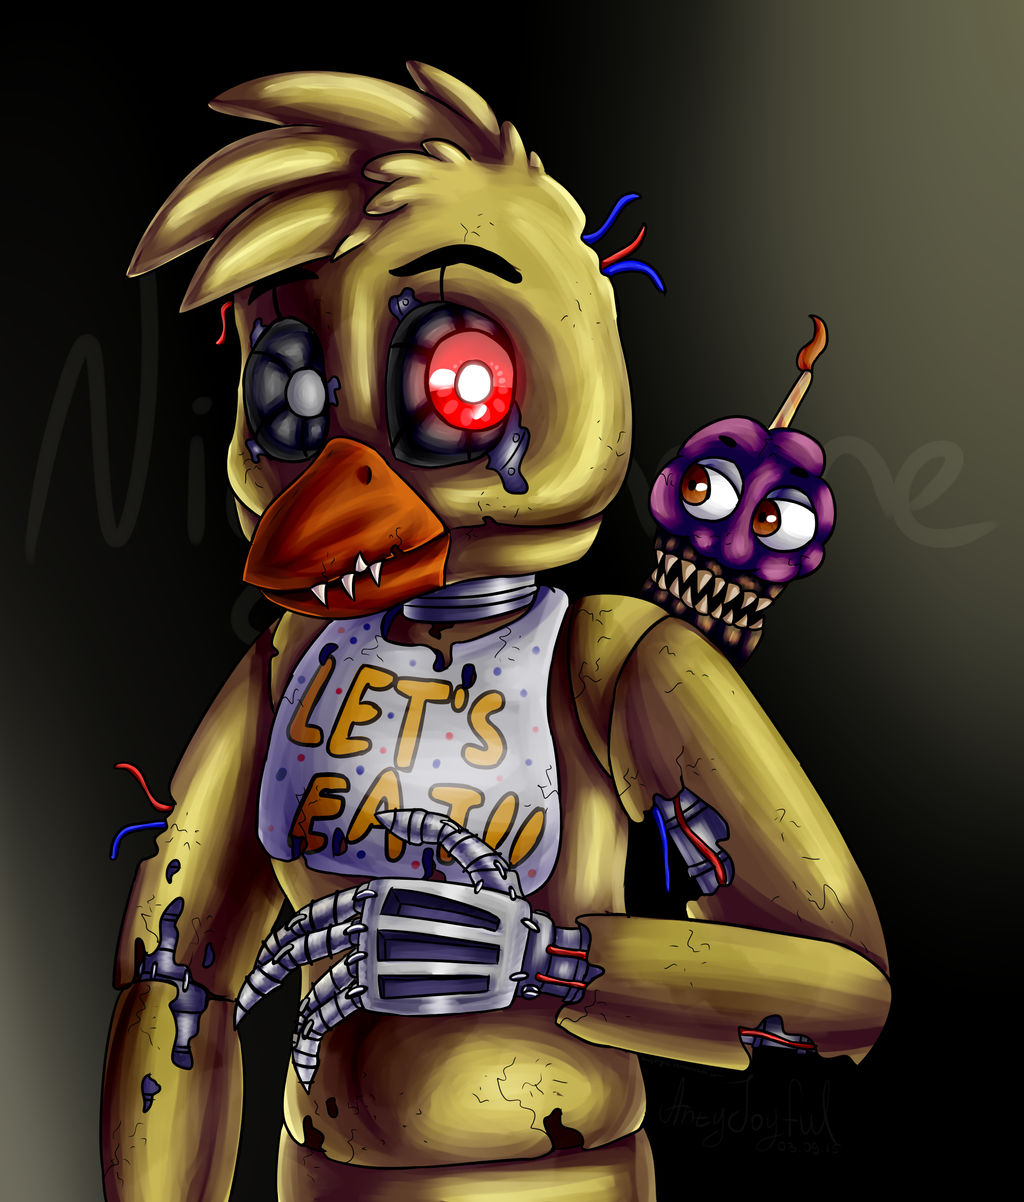 Nightmare Chica (Five Nights at Freddy's) HD Wallpapers and